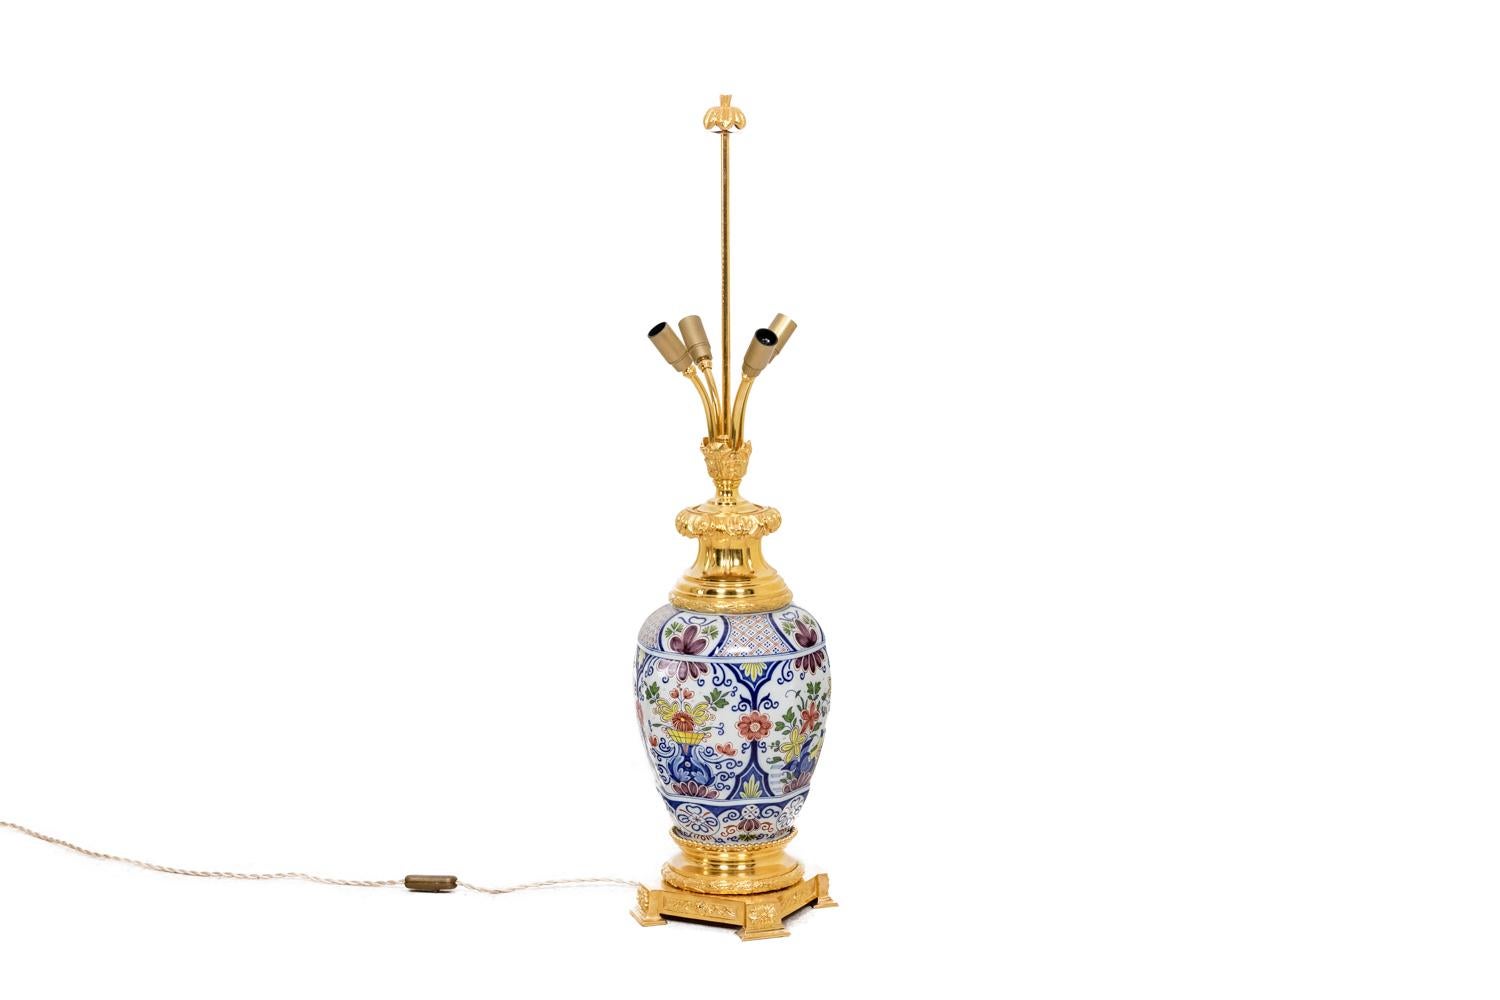 Delft earthenware lamp, polychrome. Gilt bronze mount, the top of the frame adorned with gadroons.

Quadripod base.

French work realized in the 19th century.

New and functional electrical system.

!The price doesn’t include the lampshade price.